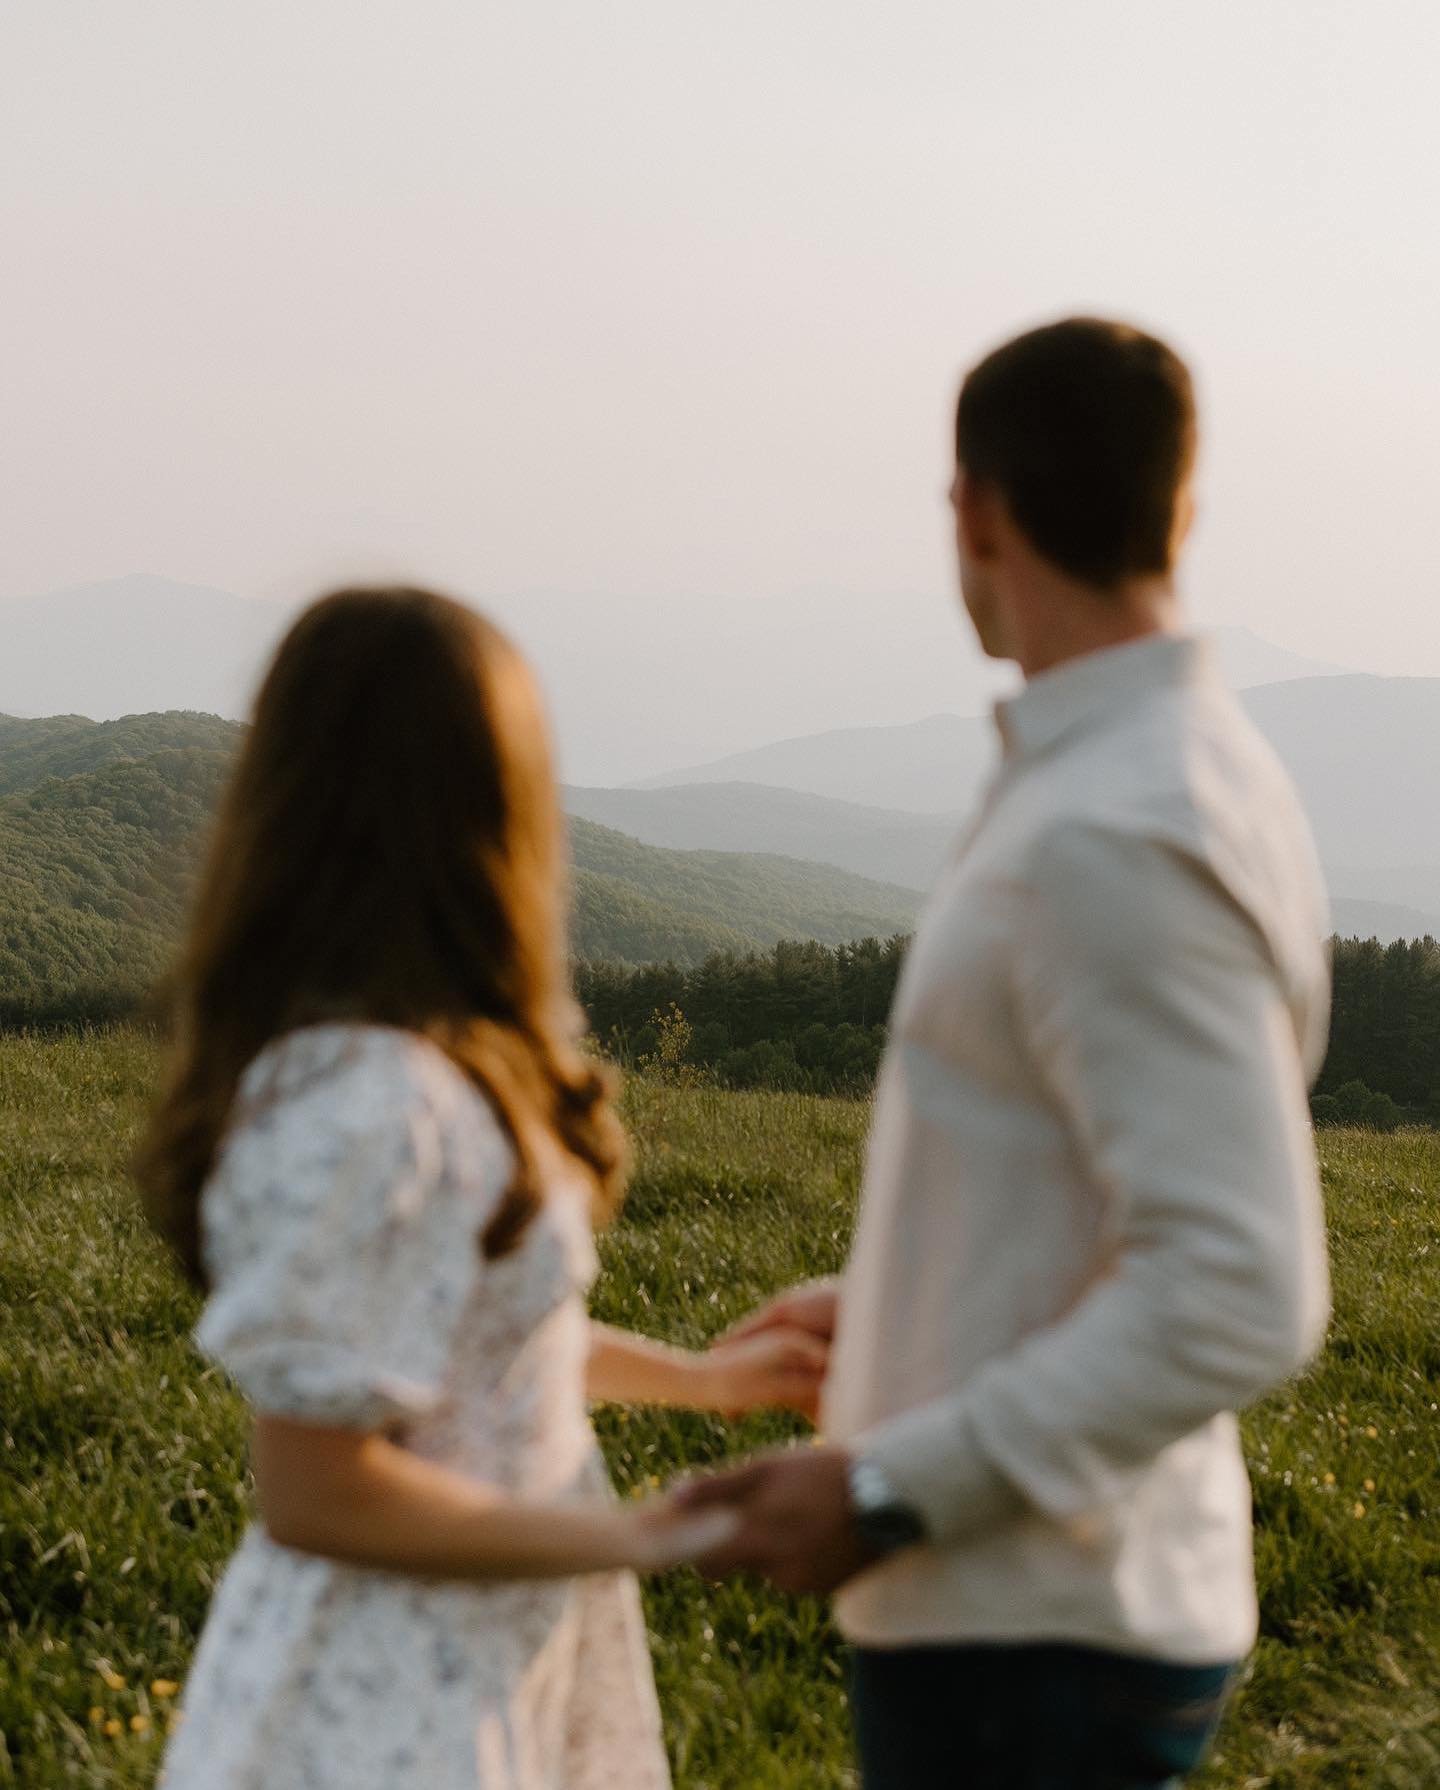 Currently spending a much-needed spring weekend wandering in the Blue Ridge 🌼

&hellip;And had to bring back a few favorite images from Kristen &amp; Conner&rsquo;s dreamy Max Patch engagement session last year

These wide open, layered mountain vie